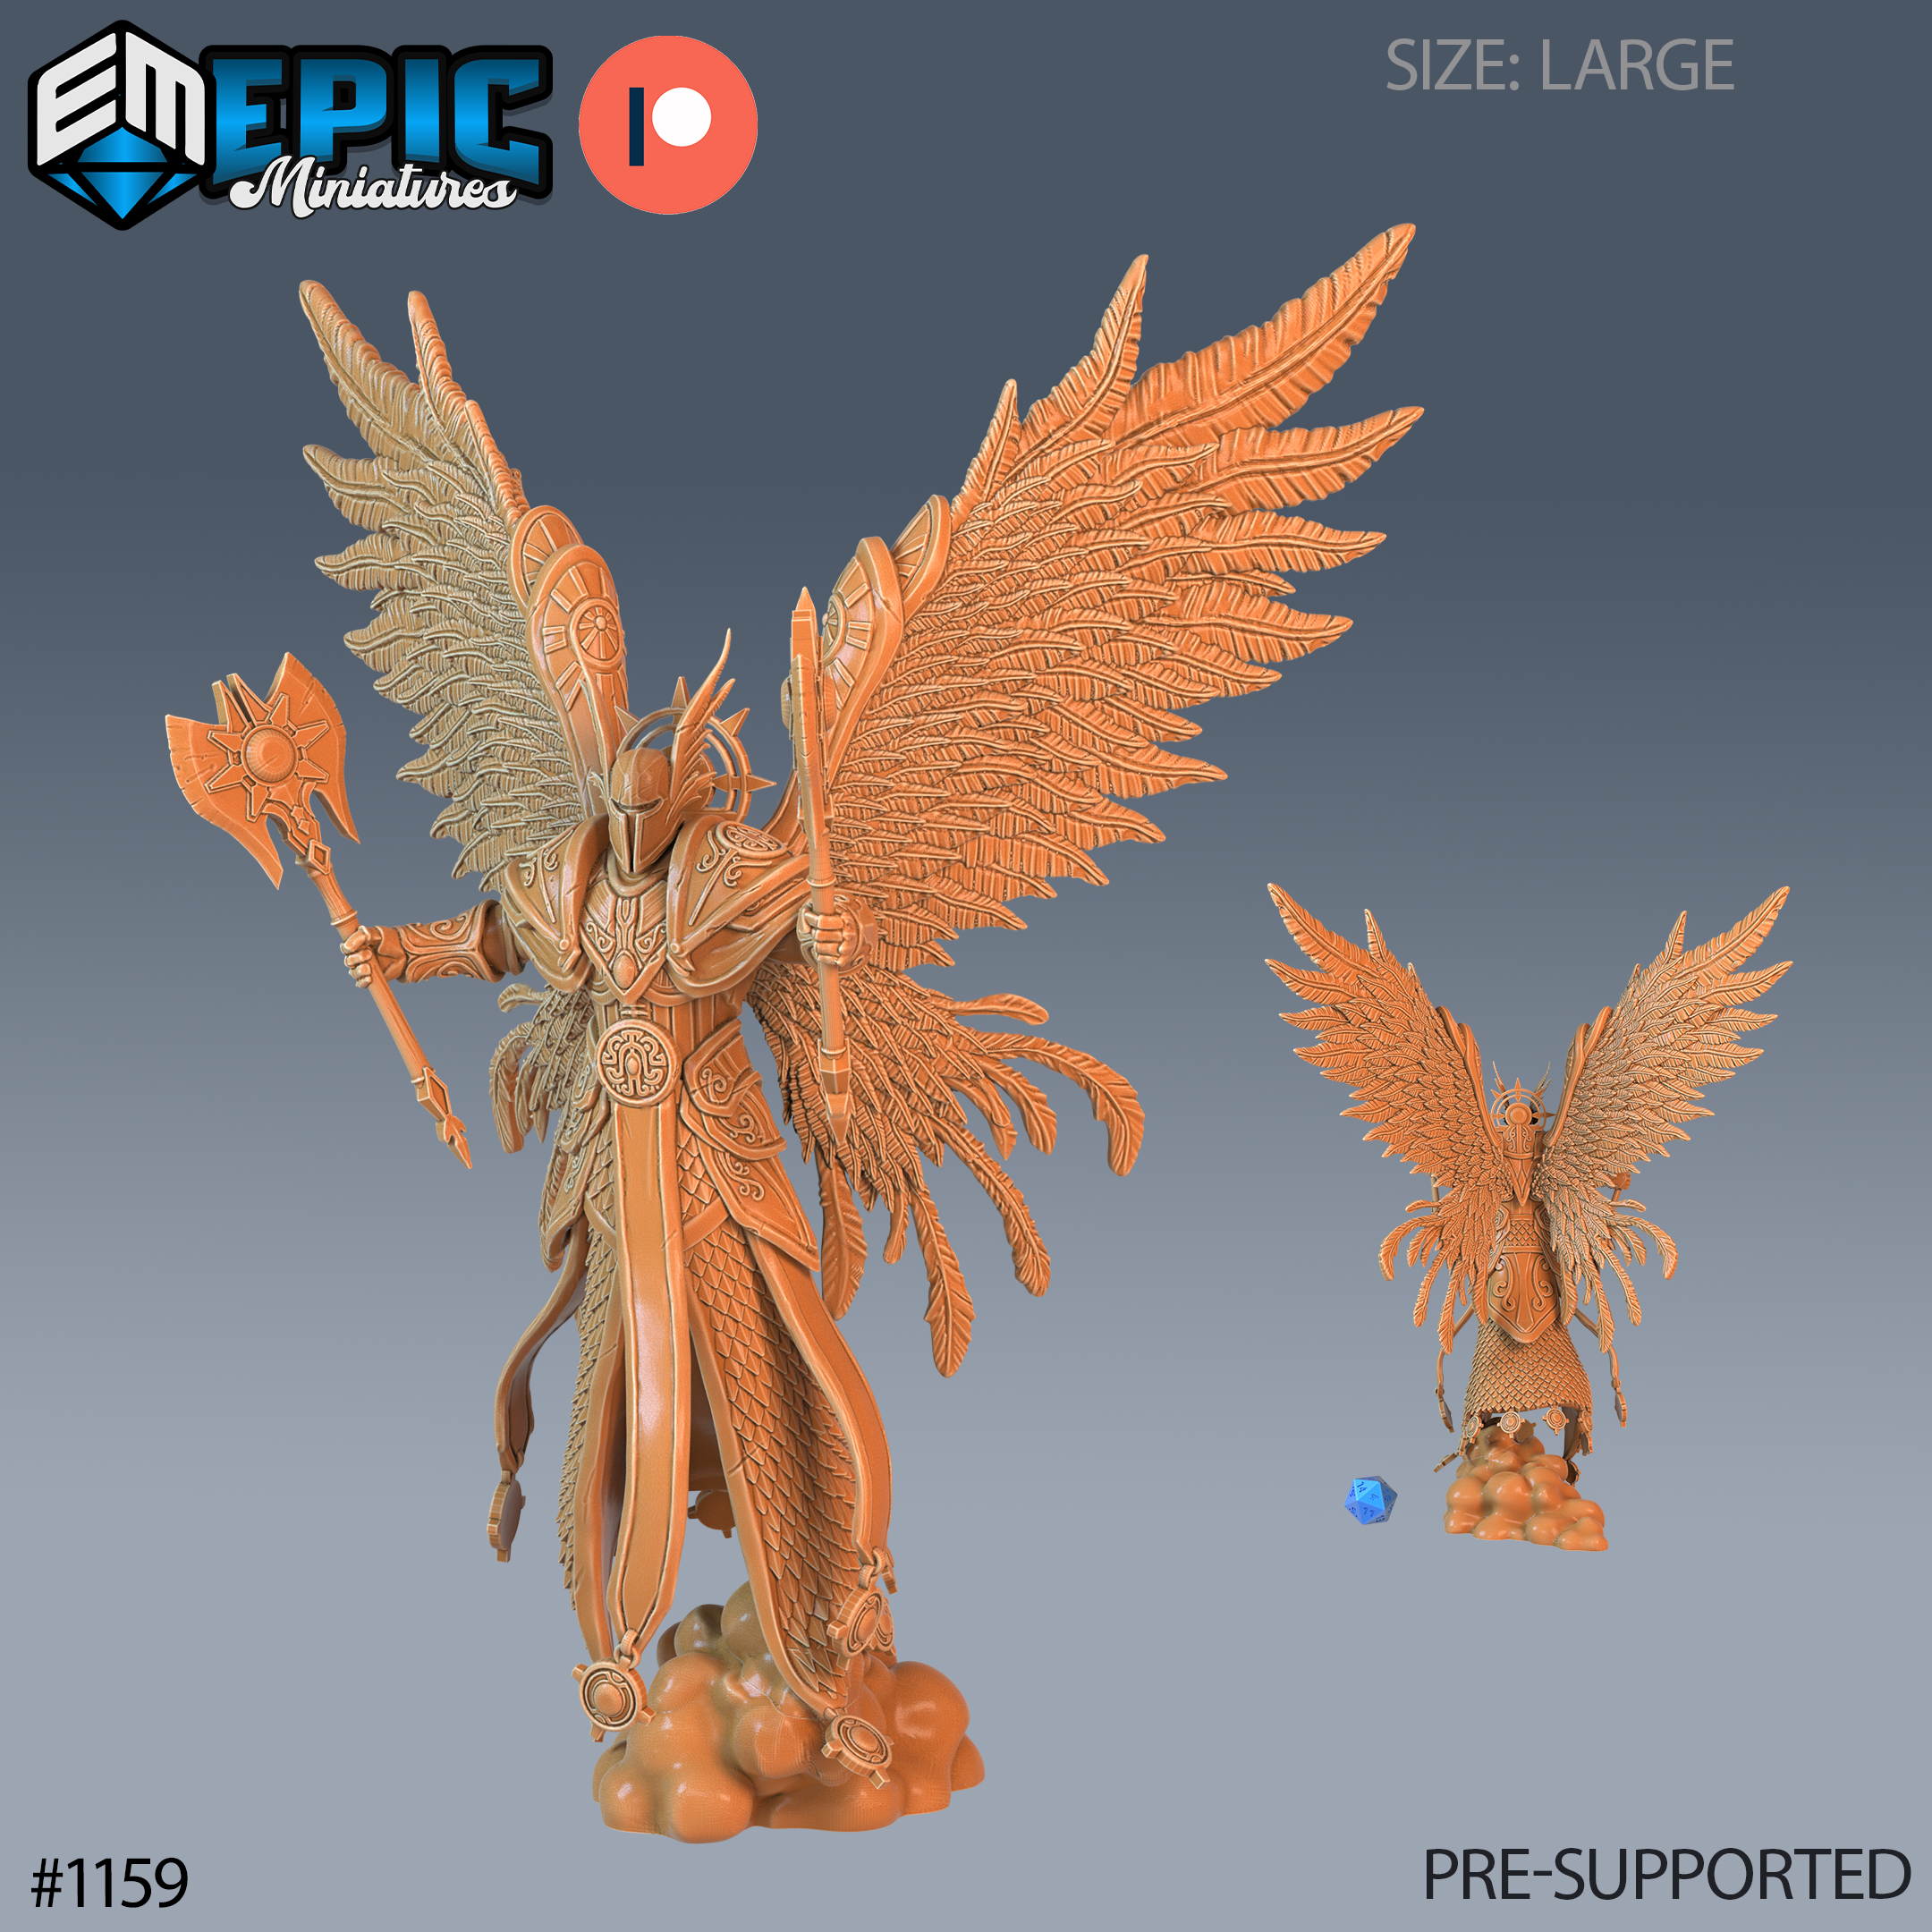 Humanoid with wings designed by Epic Miniatures